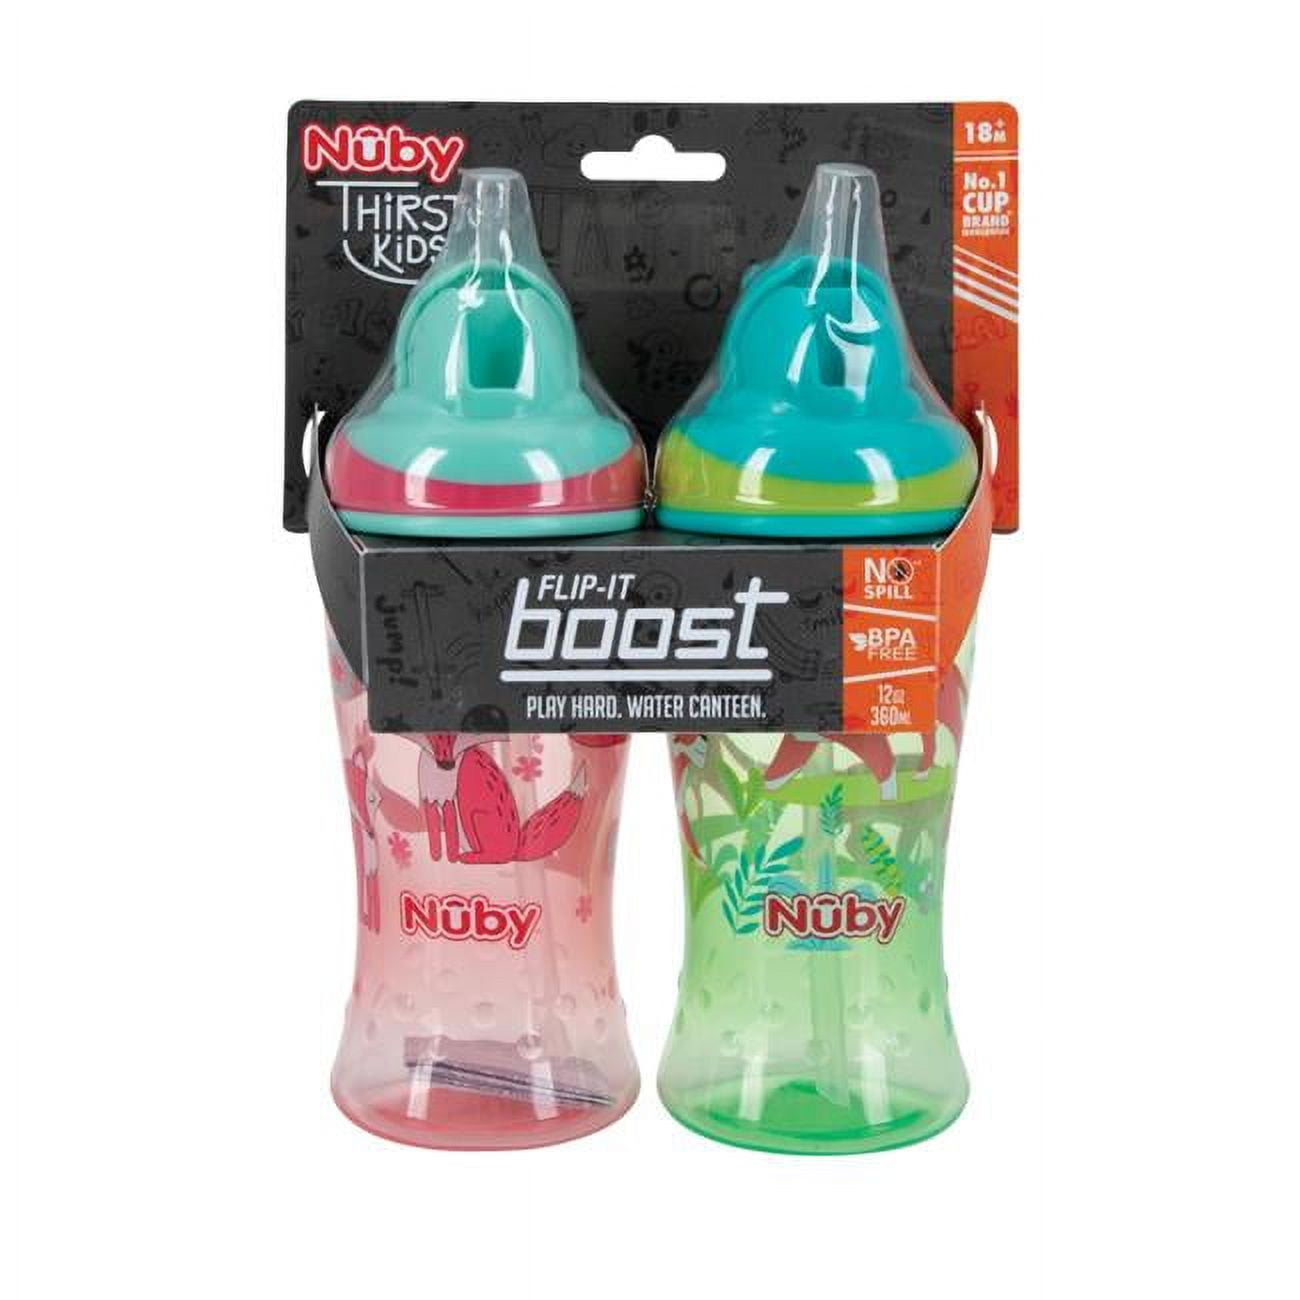 12 oz Nuby No-Spill Boost Cups with Flip-it Straw for 18 Plus Months - 2 per Pack - Case of 24